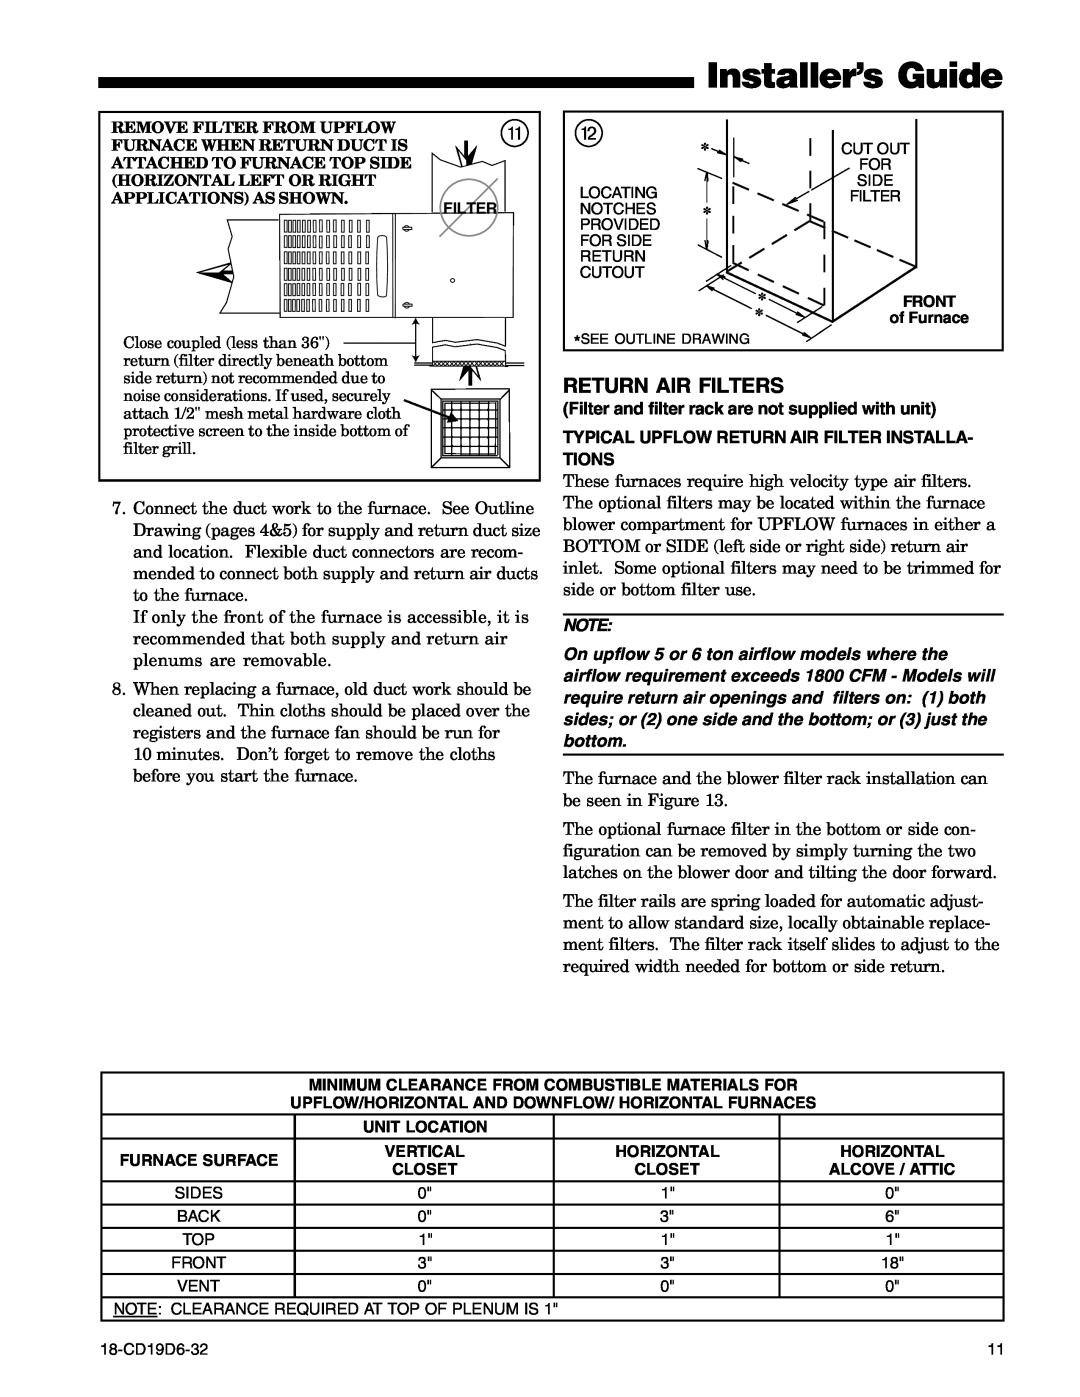 Trane DX1B080A9421A, UX1C100A9481A, UX1C080A9601A manual Installer’s Guide, Filter and filter rack are not supplied with unit 